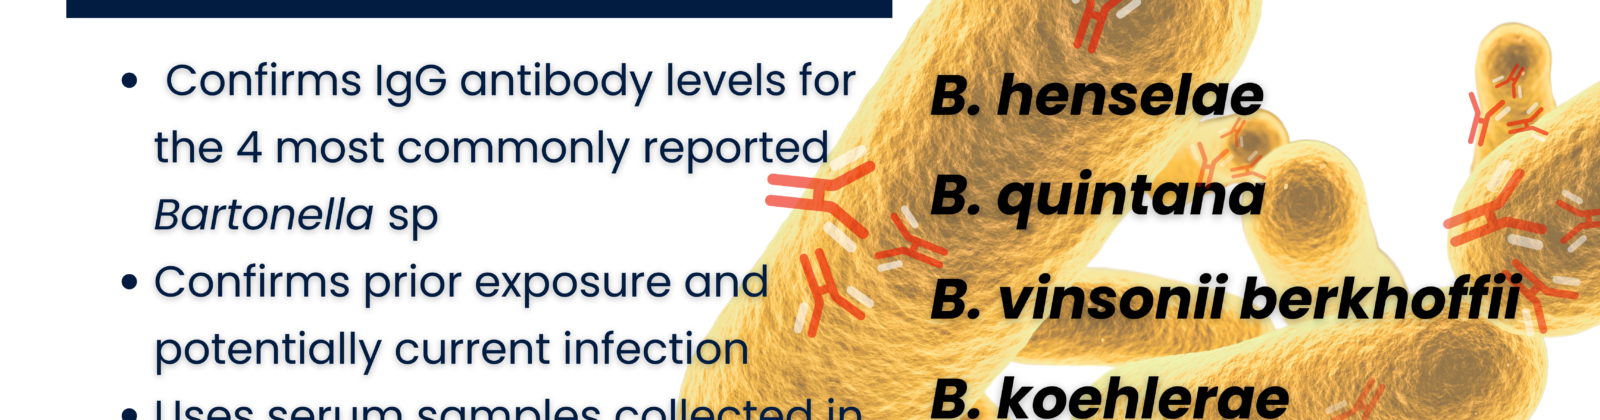 image of spherical bacteria with antibodies binding to it. Bullet points describing the 4 Species test panel are on the right.